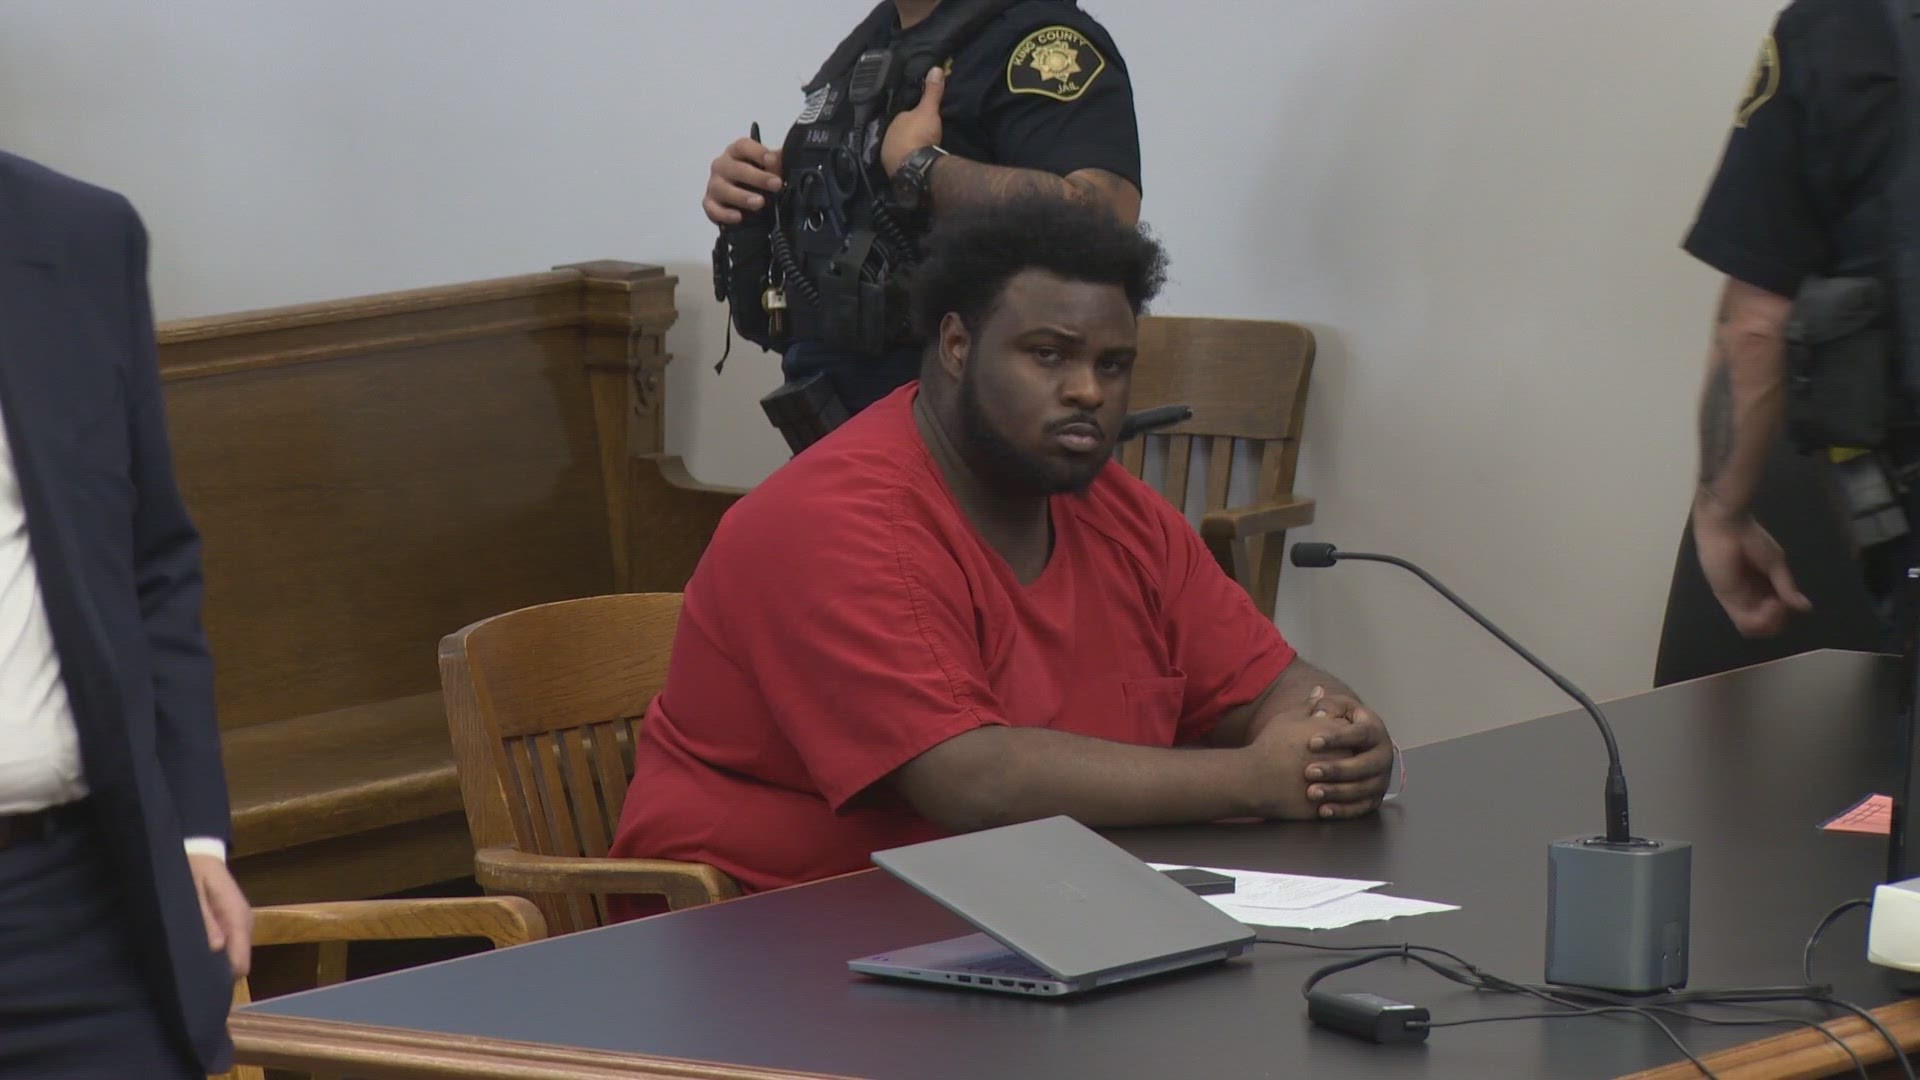 Marcel Long pleaded guilty to second-degree murder in the death of 19-year-old Horace Lorenzo Anderson.